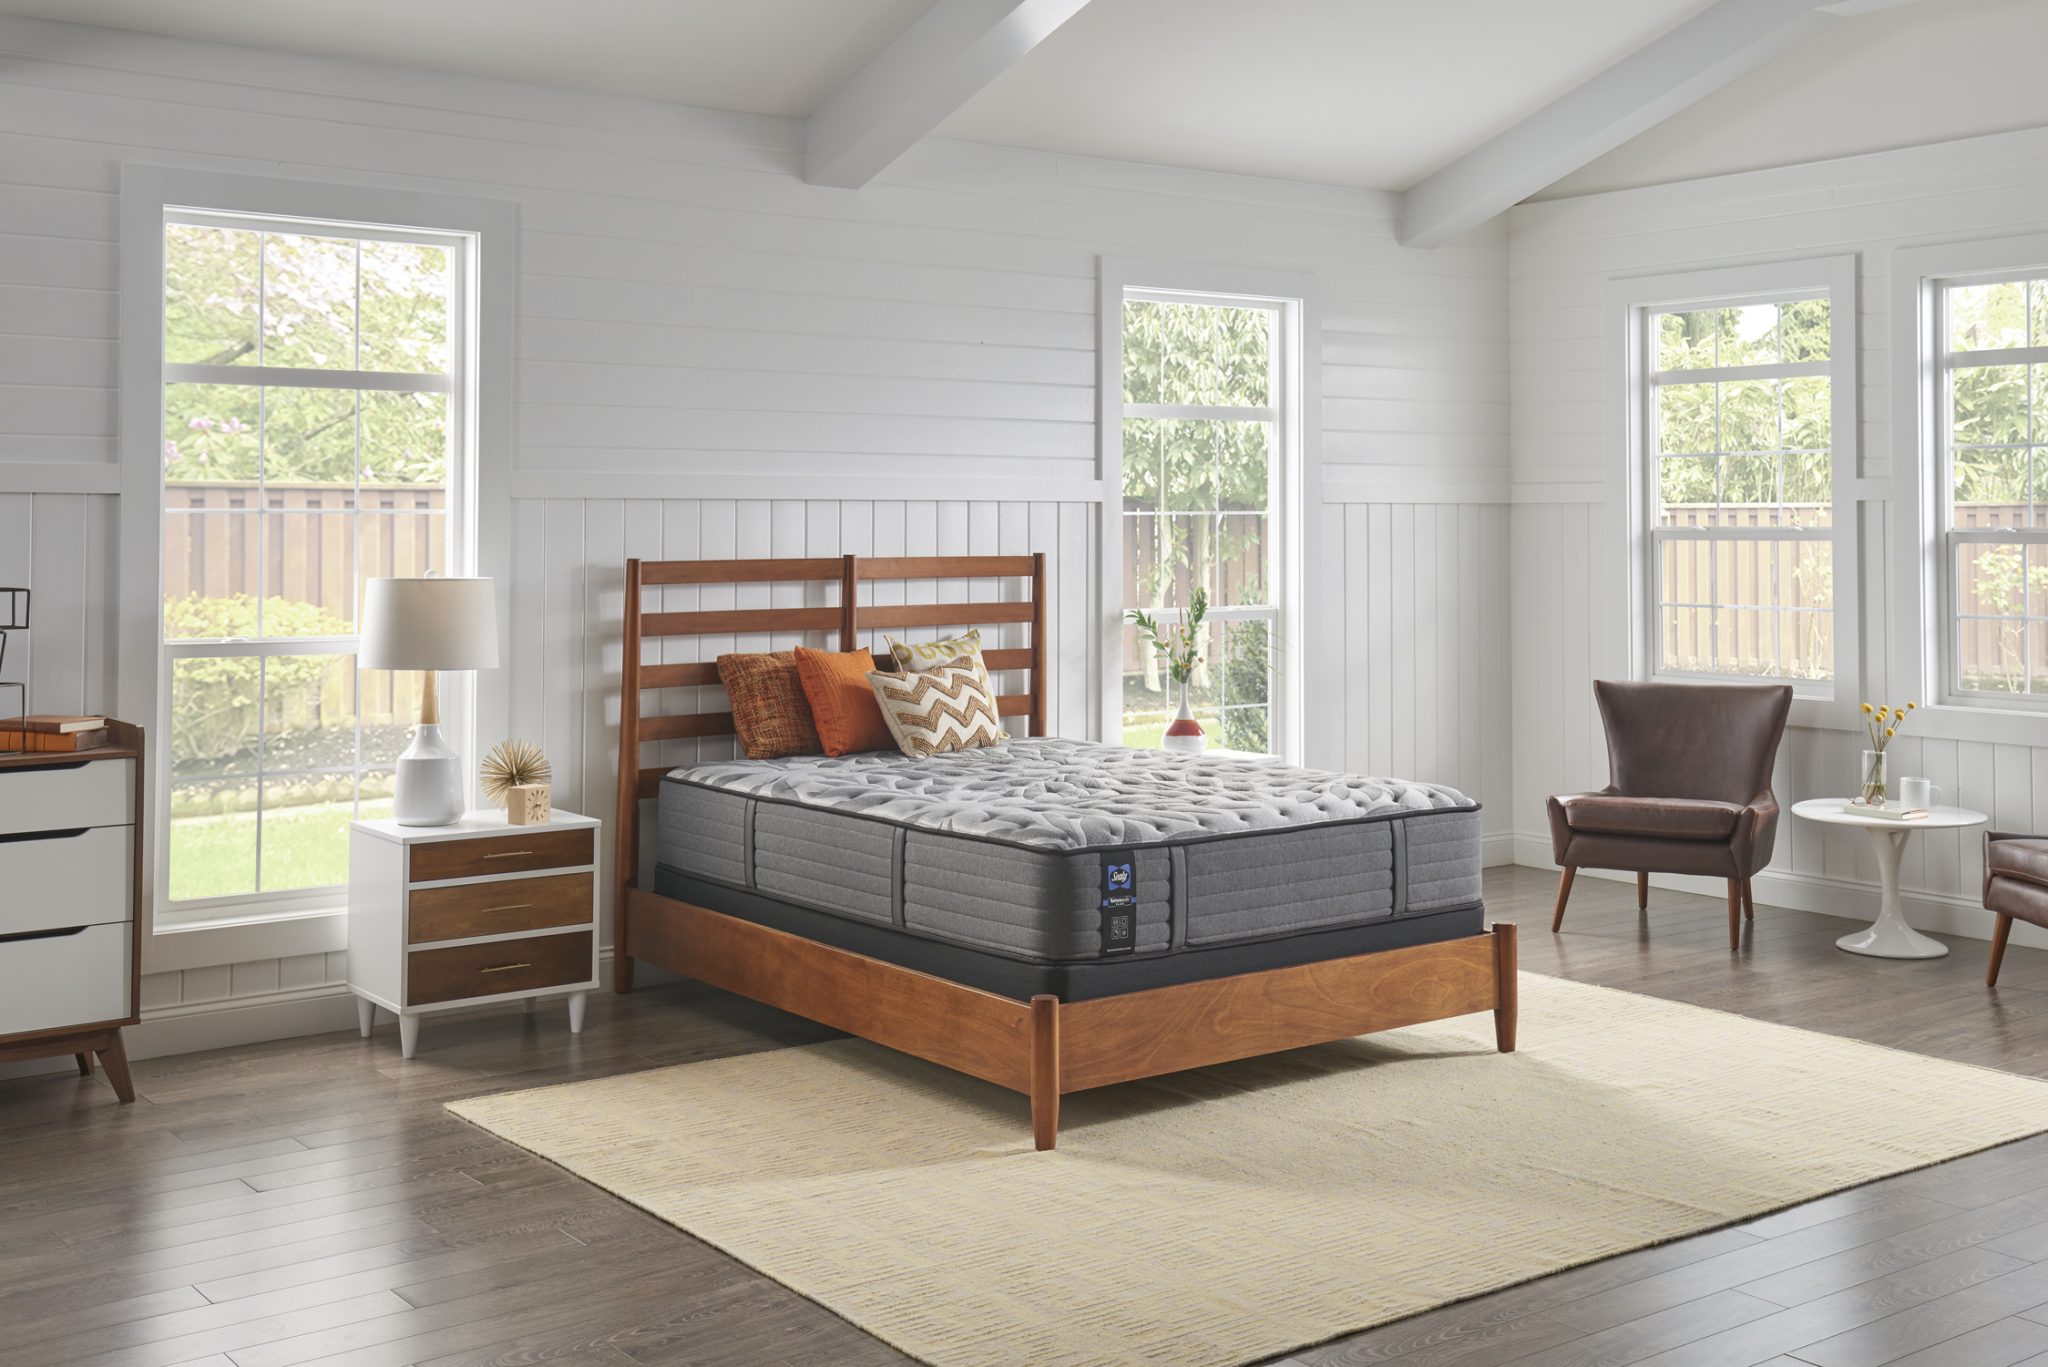 cloud sealy posturepedic twin mattress and bed frame